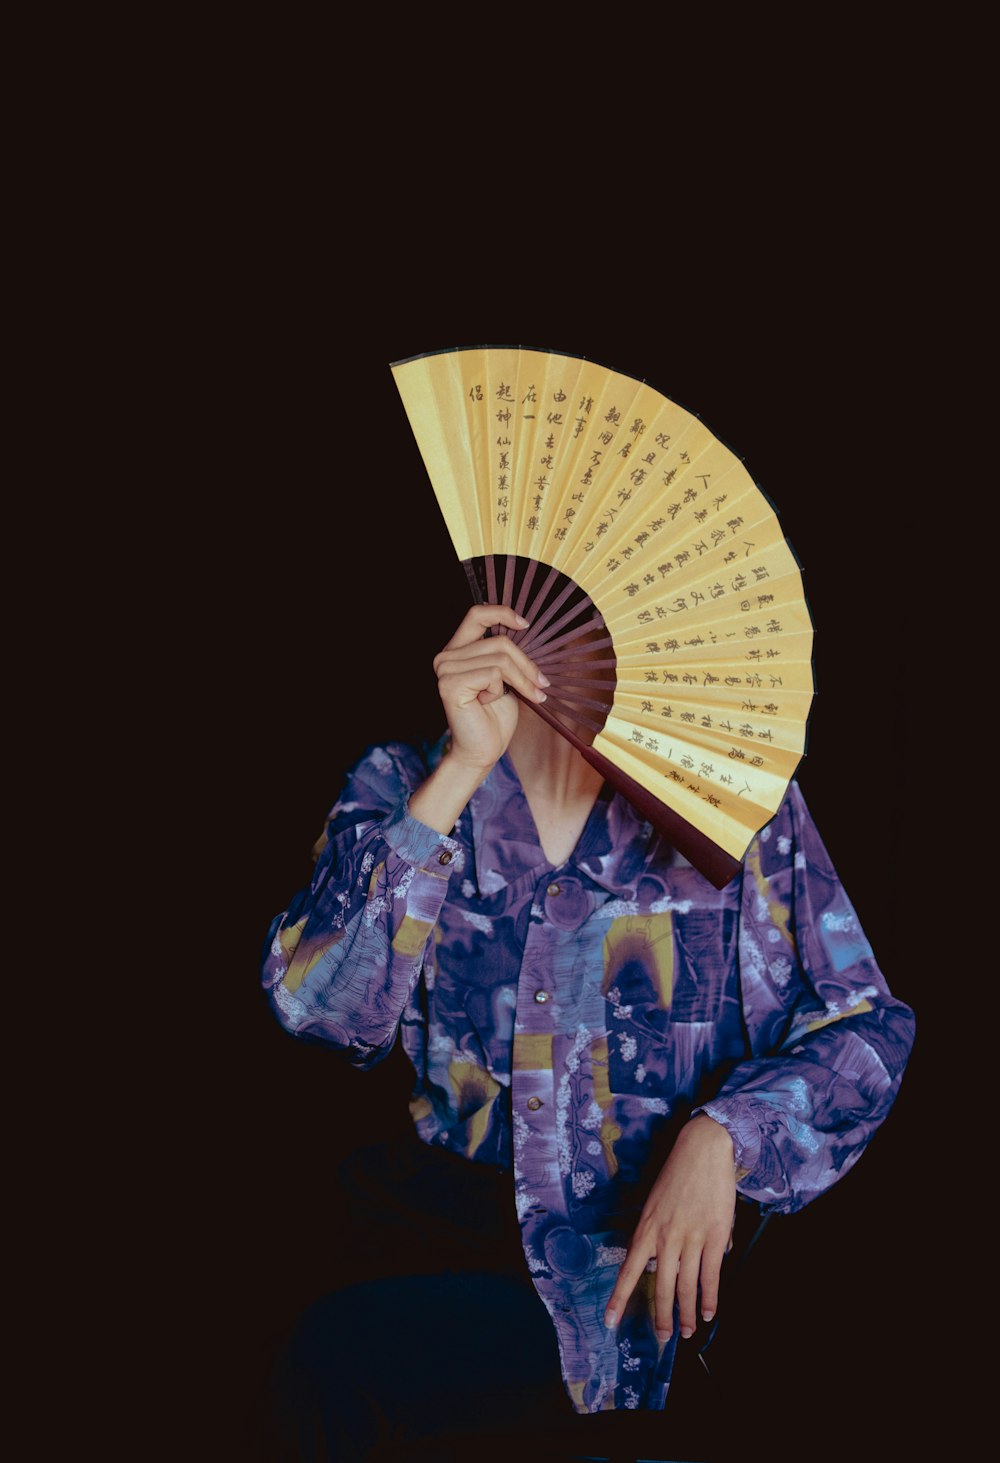 a woman holding a yellow fan over her face